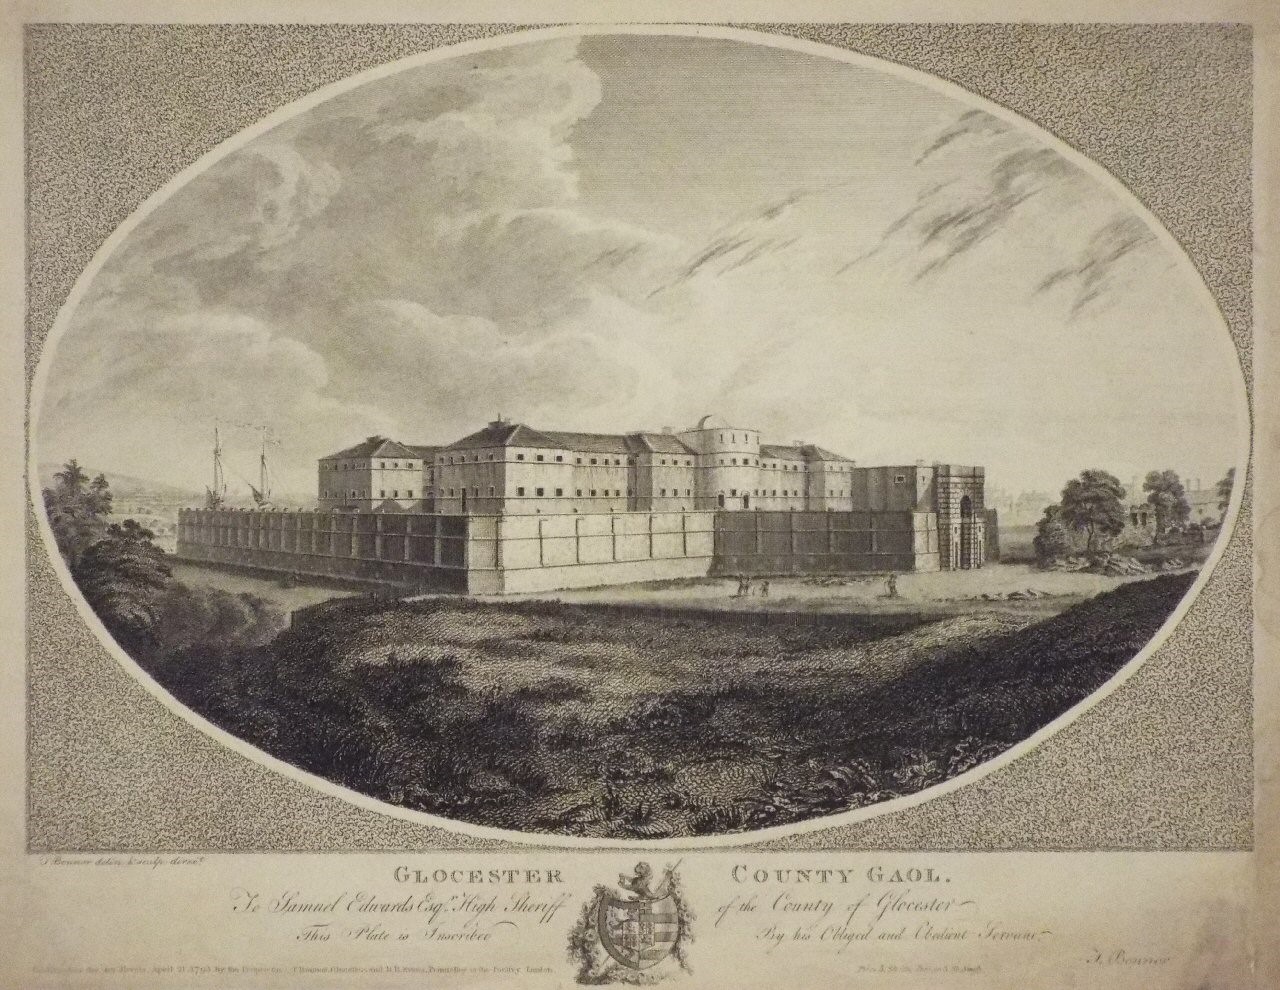 Print - Glocester County Gaol. To Samuel Edwards Esqr. High Sheriff of the County of Glocester... - Bonnor